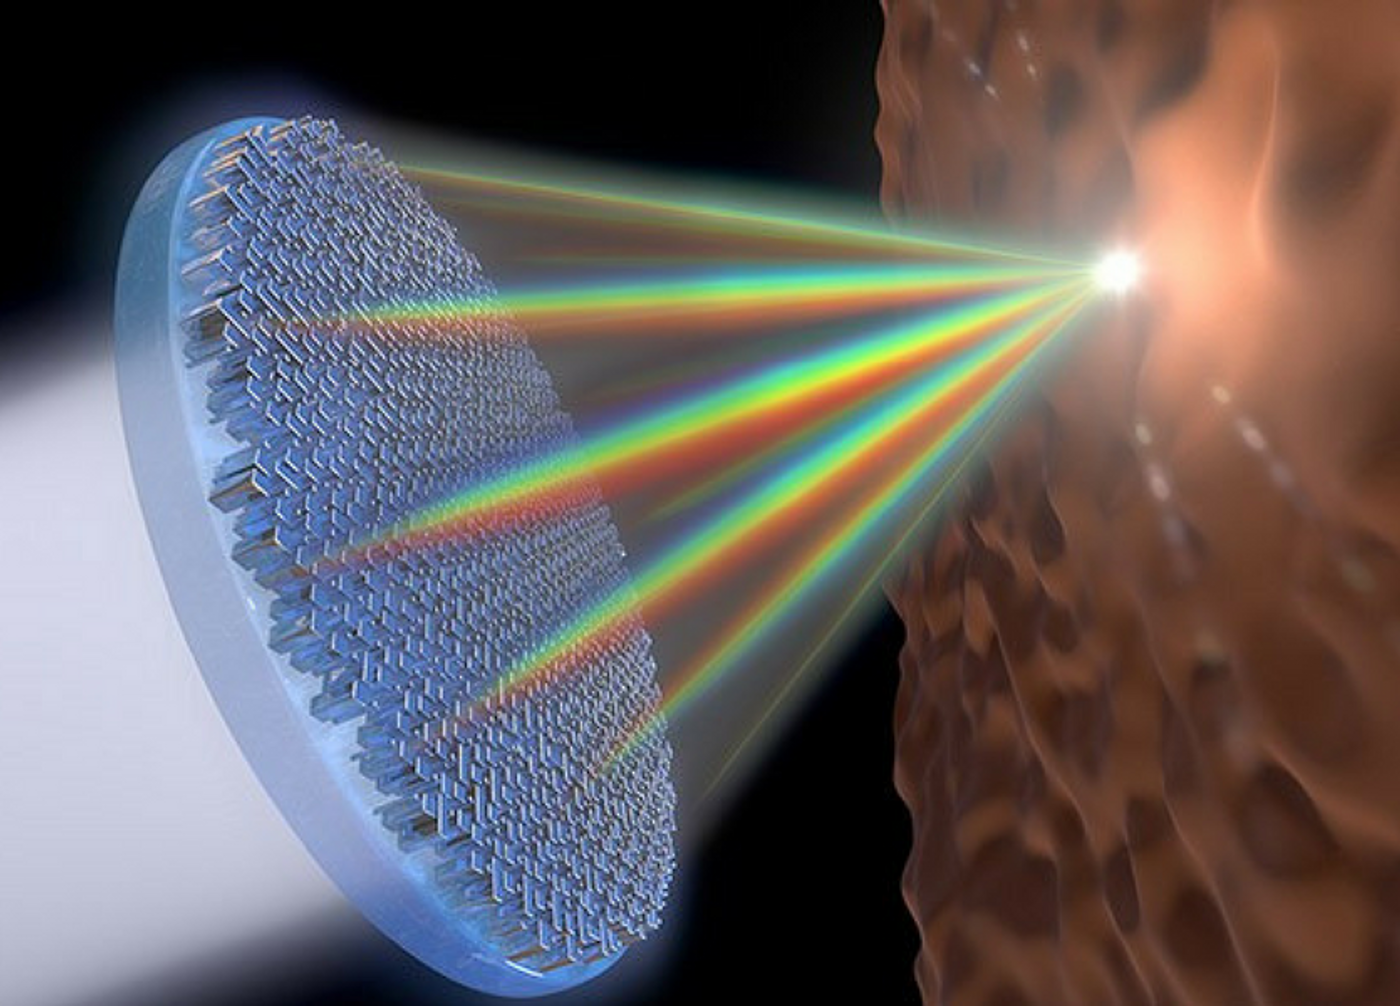 This flat metalens is the first single lens that can focus the entire visible spectrum of light. Credit: Jared Sisler/Harvard SEAS